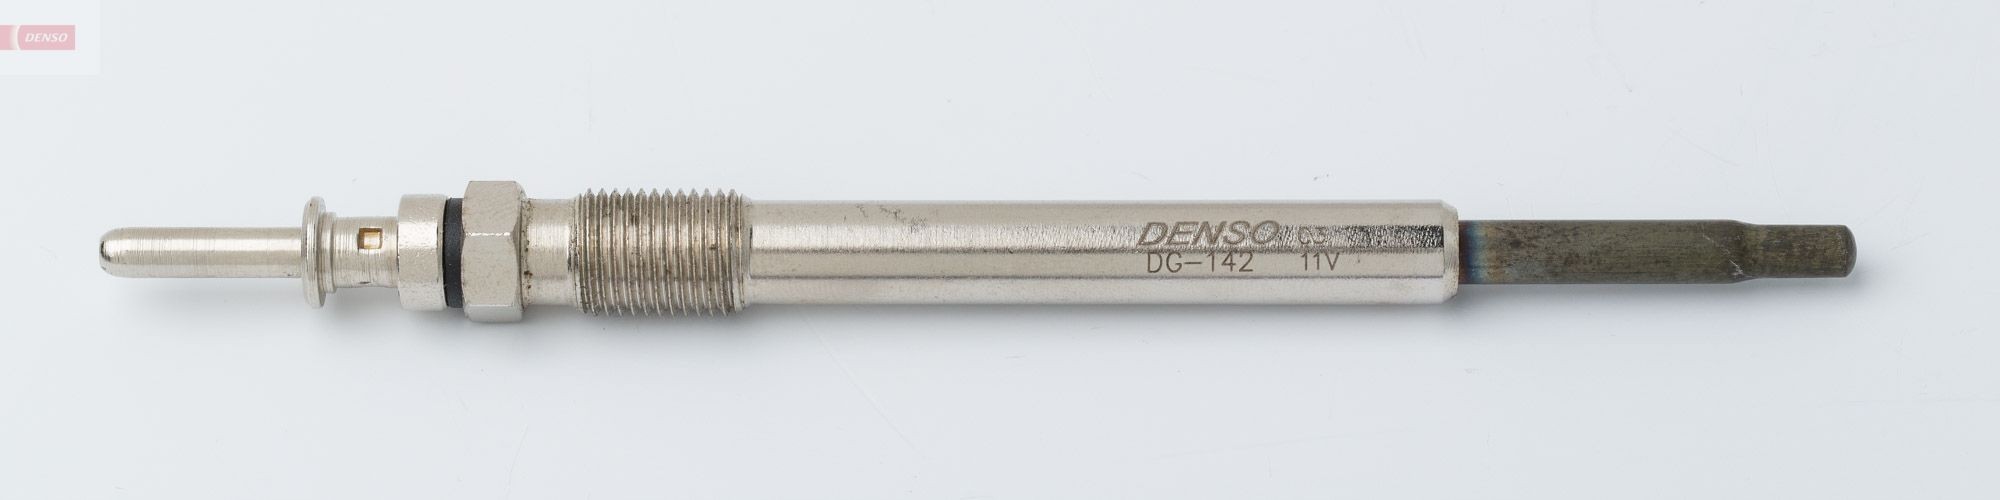 Great value for money - DENSO Glow plug DG-142